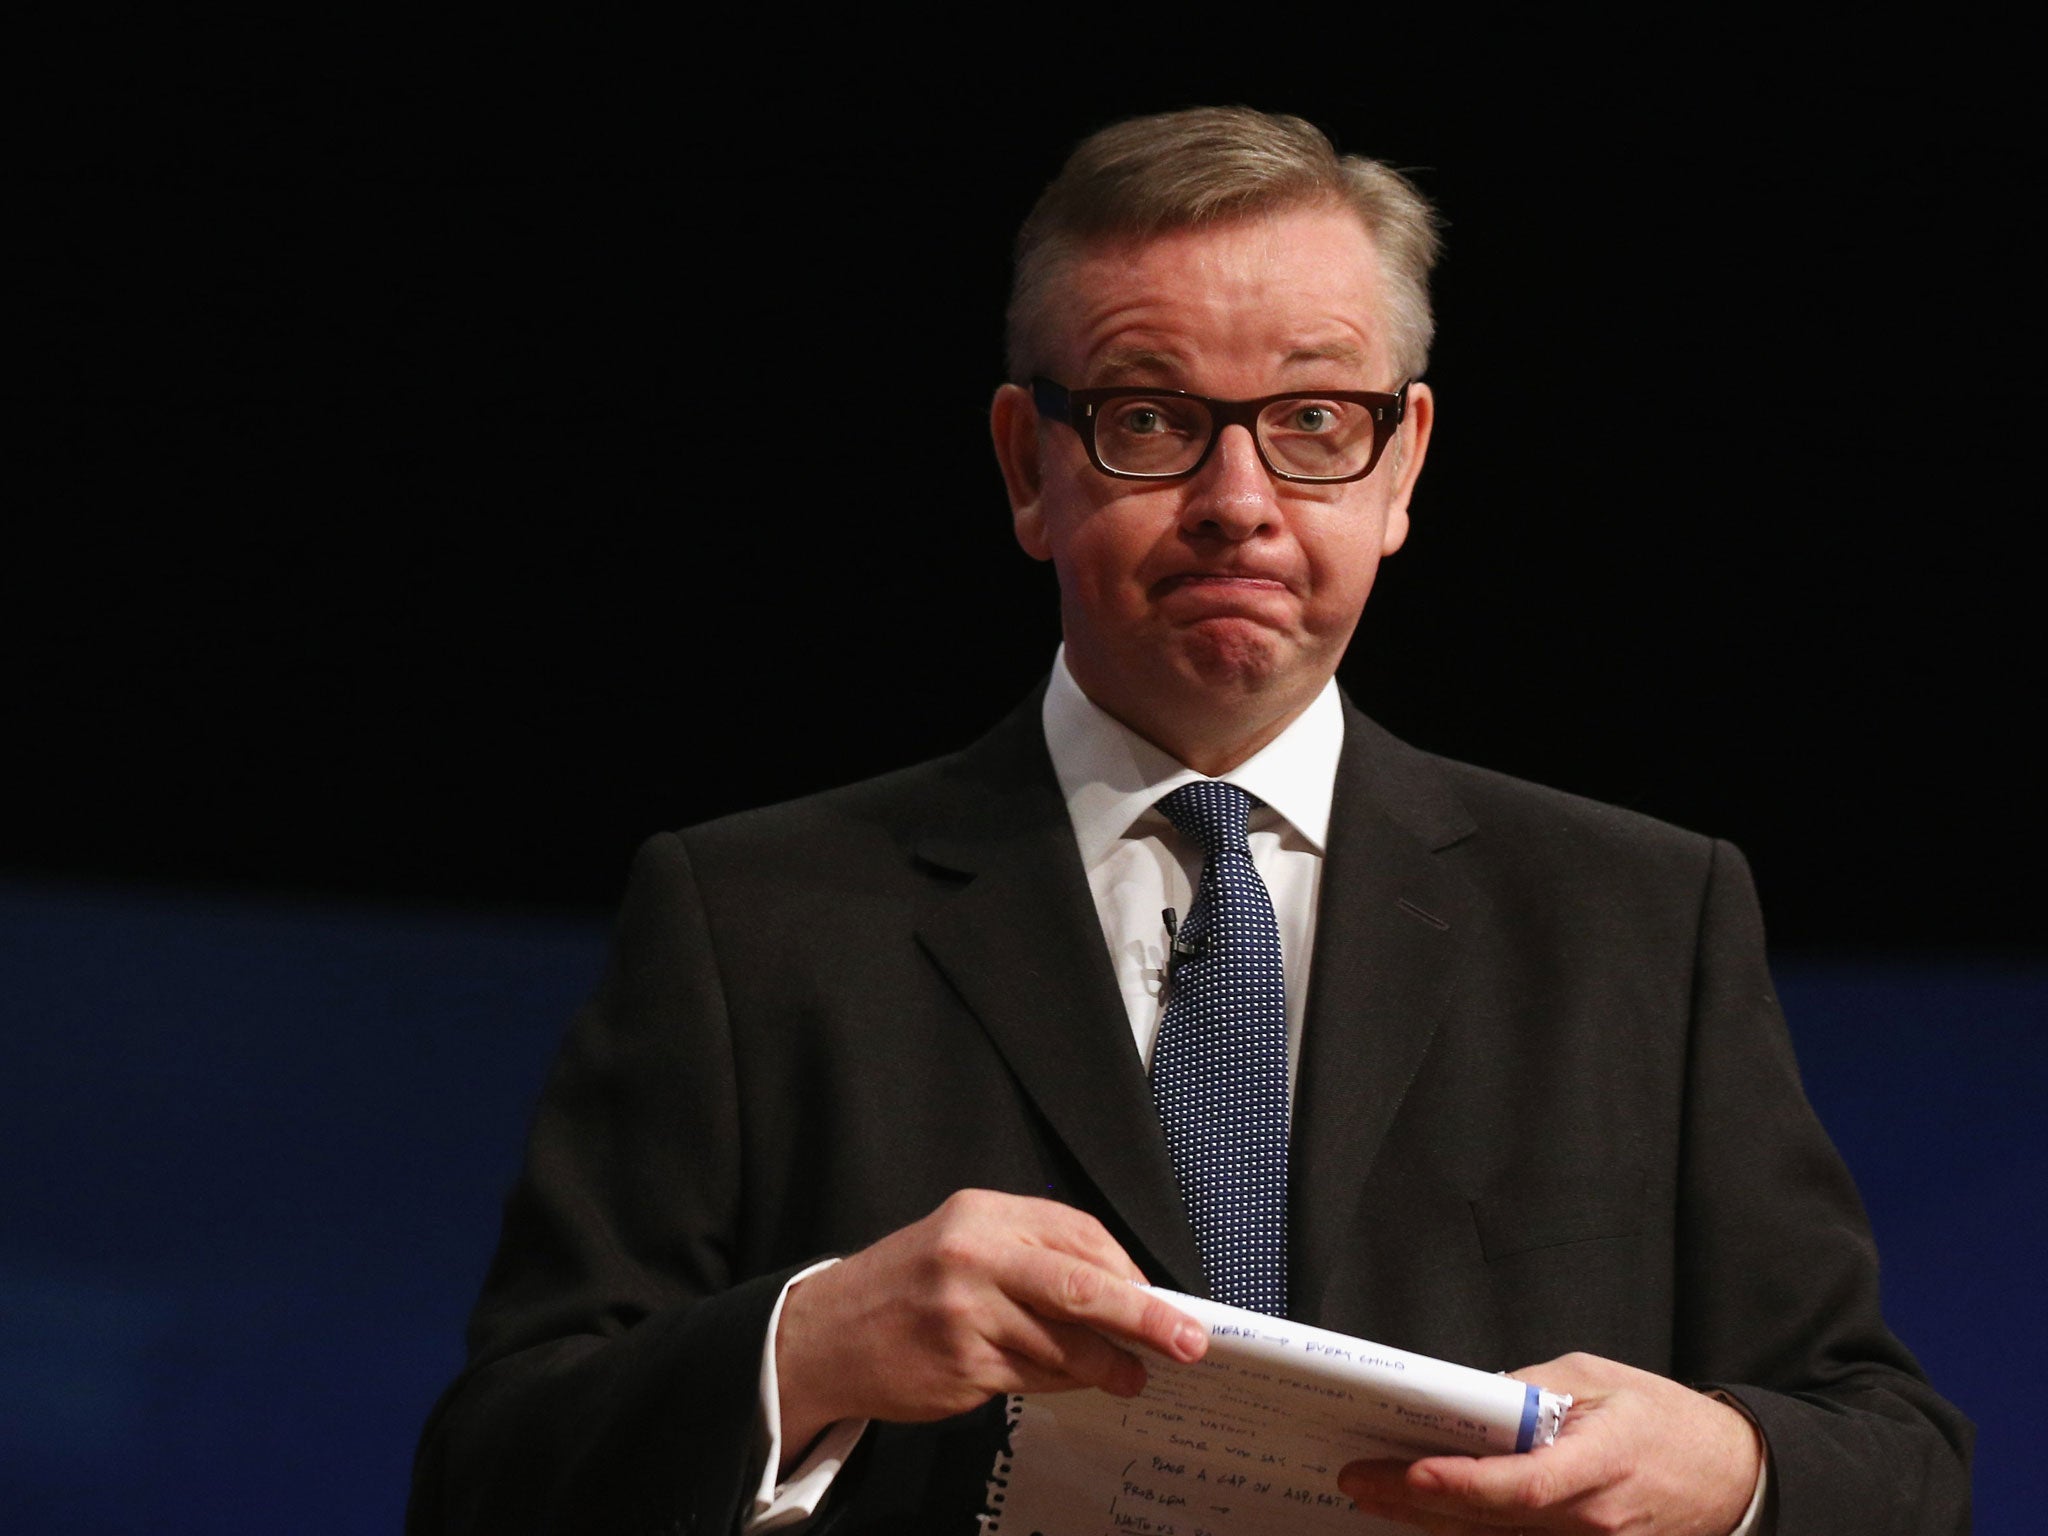 Michael Gove: he has cited the Harris Academy as an example to follow in raising standards